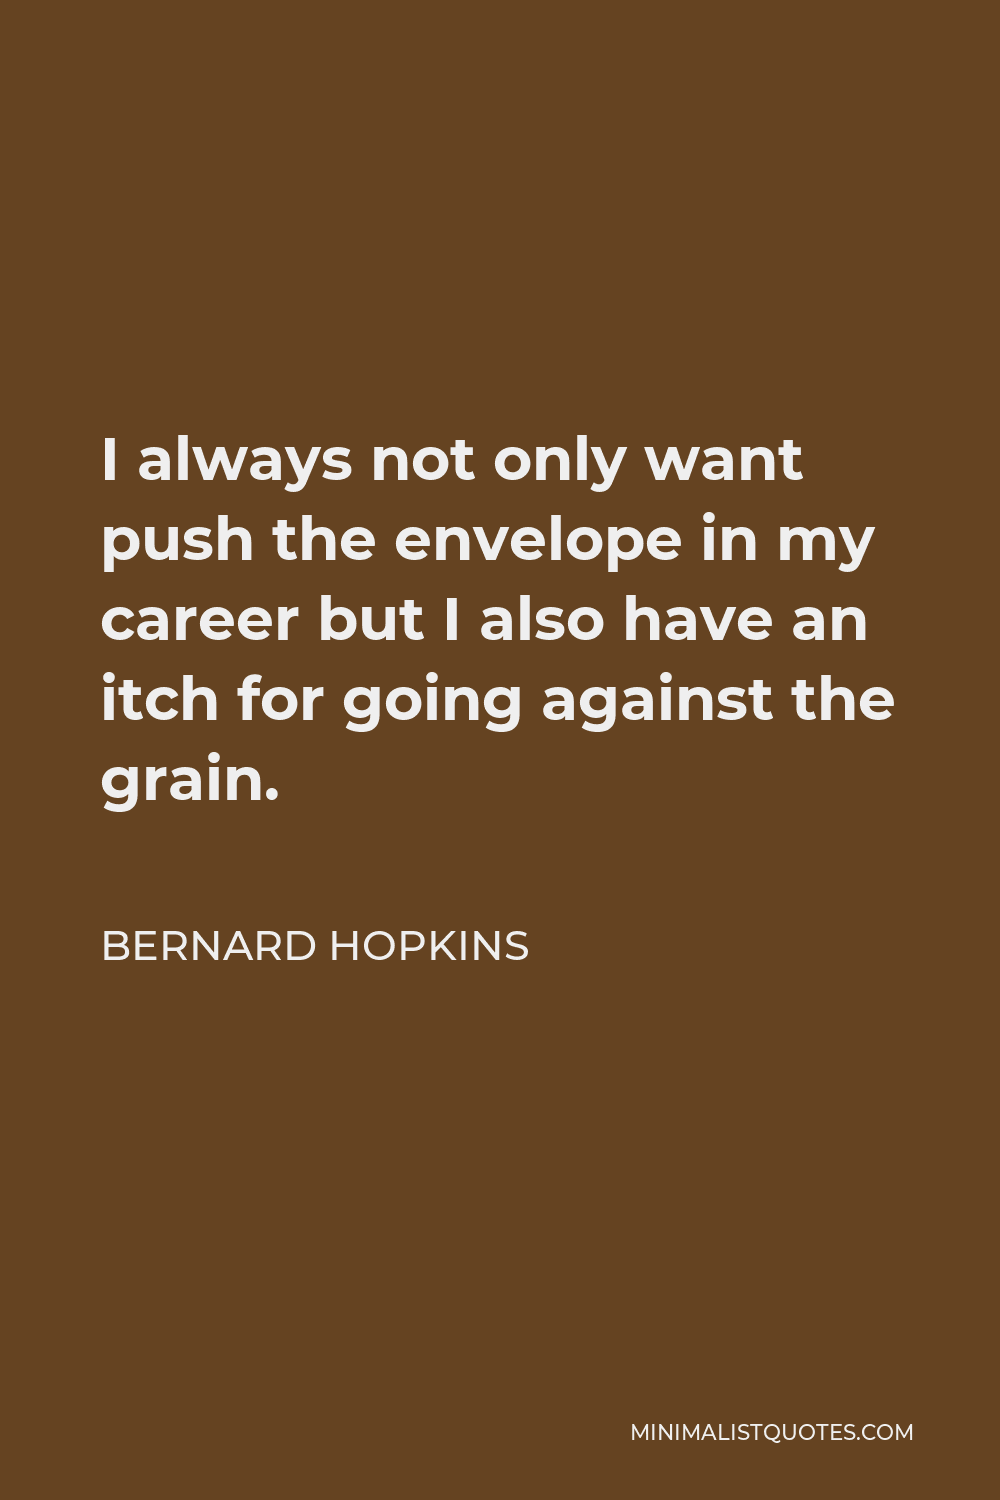 Bernard Hopkins Quote - I always not only want push the envelope in my career but I also have an itch for going against the grain.